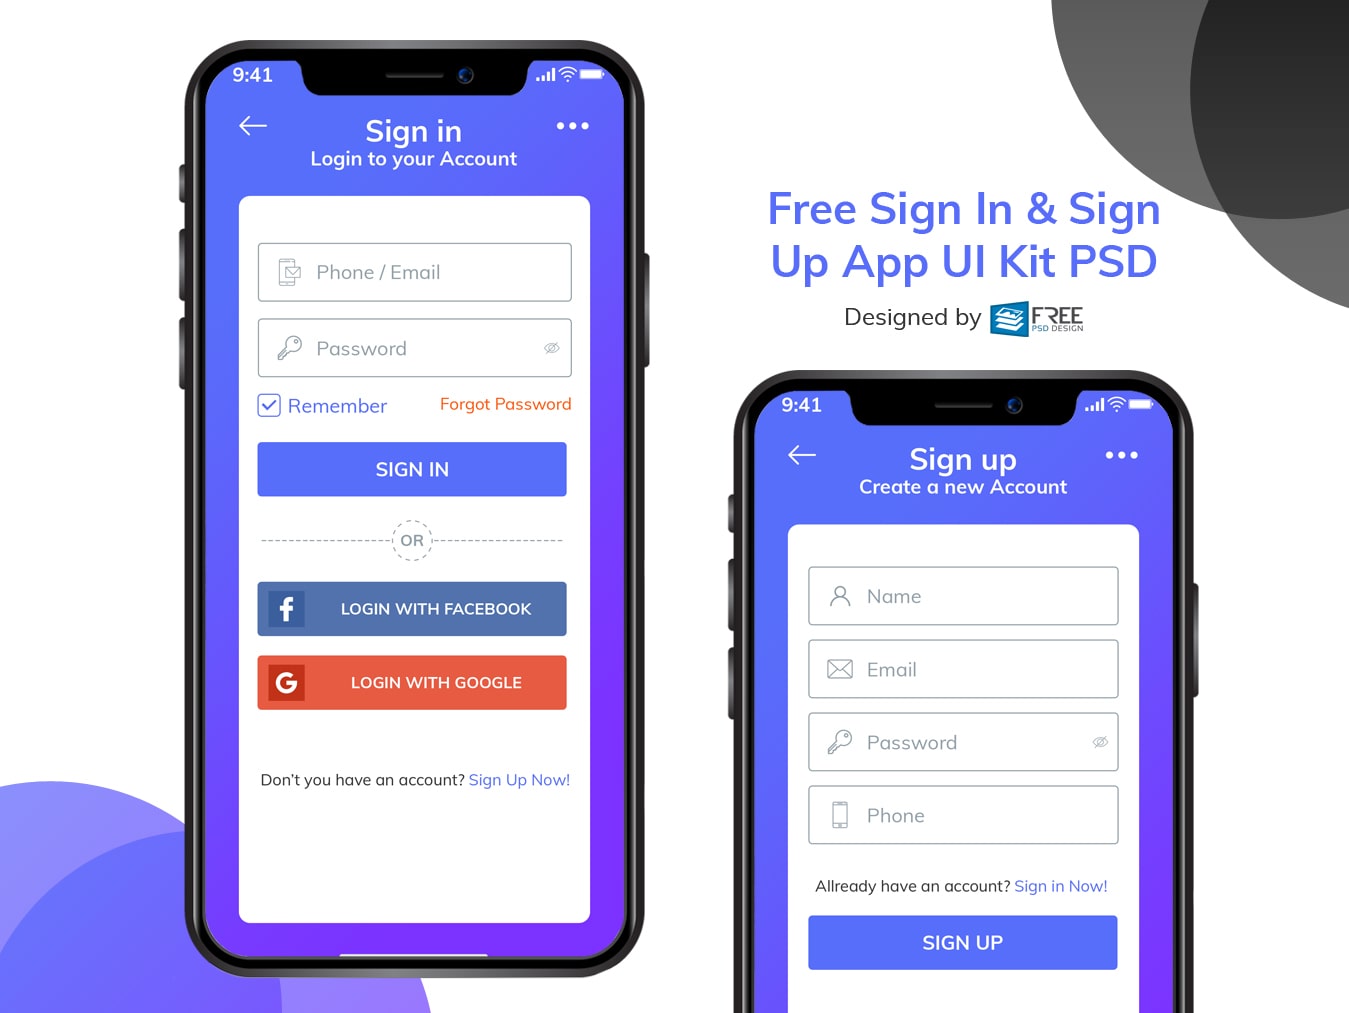 Free Sign In & Sign Up App UI Kit PSD